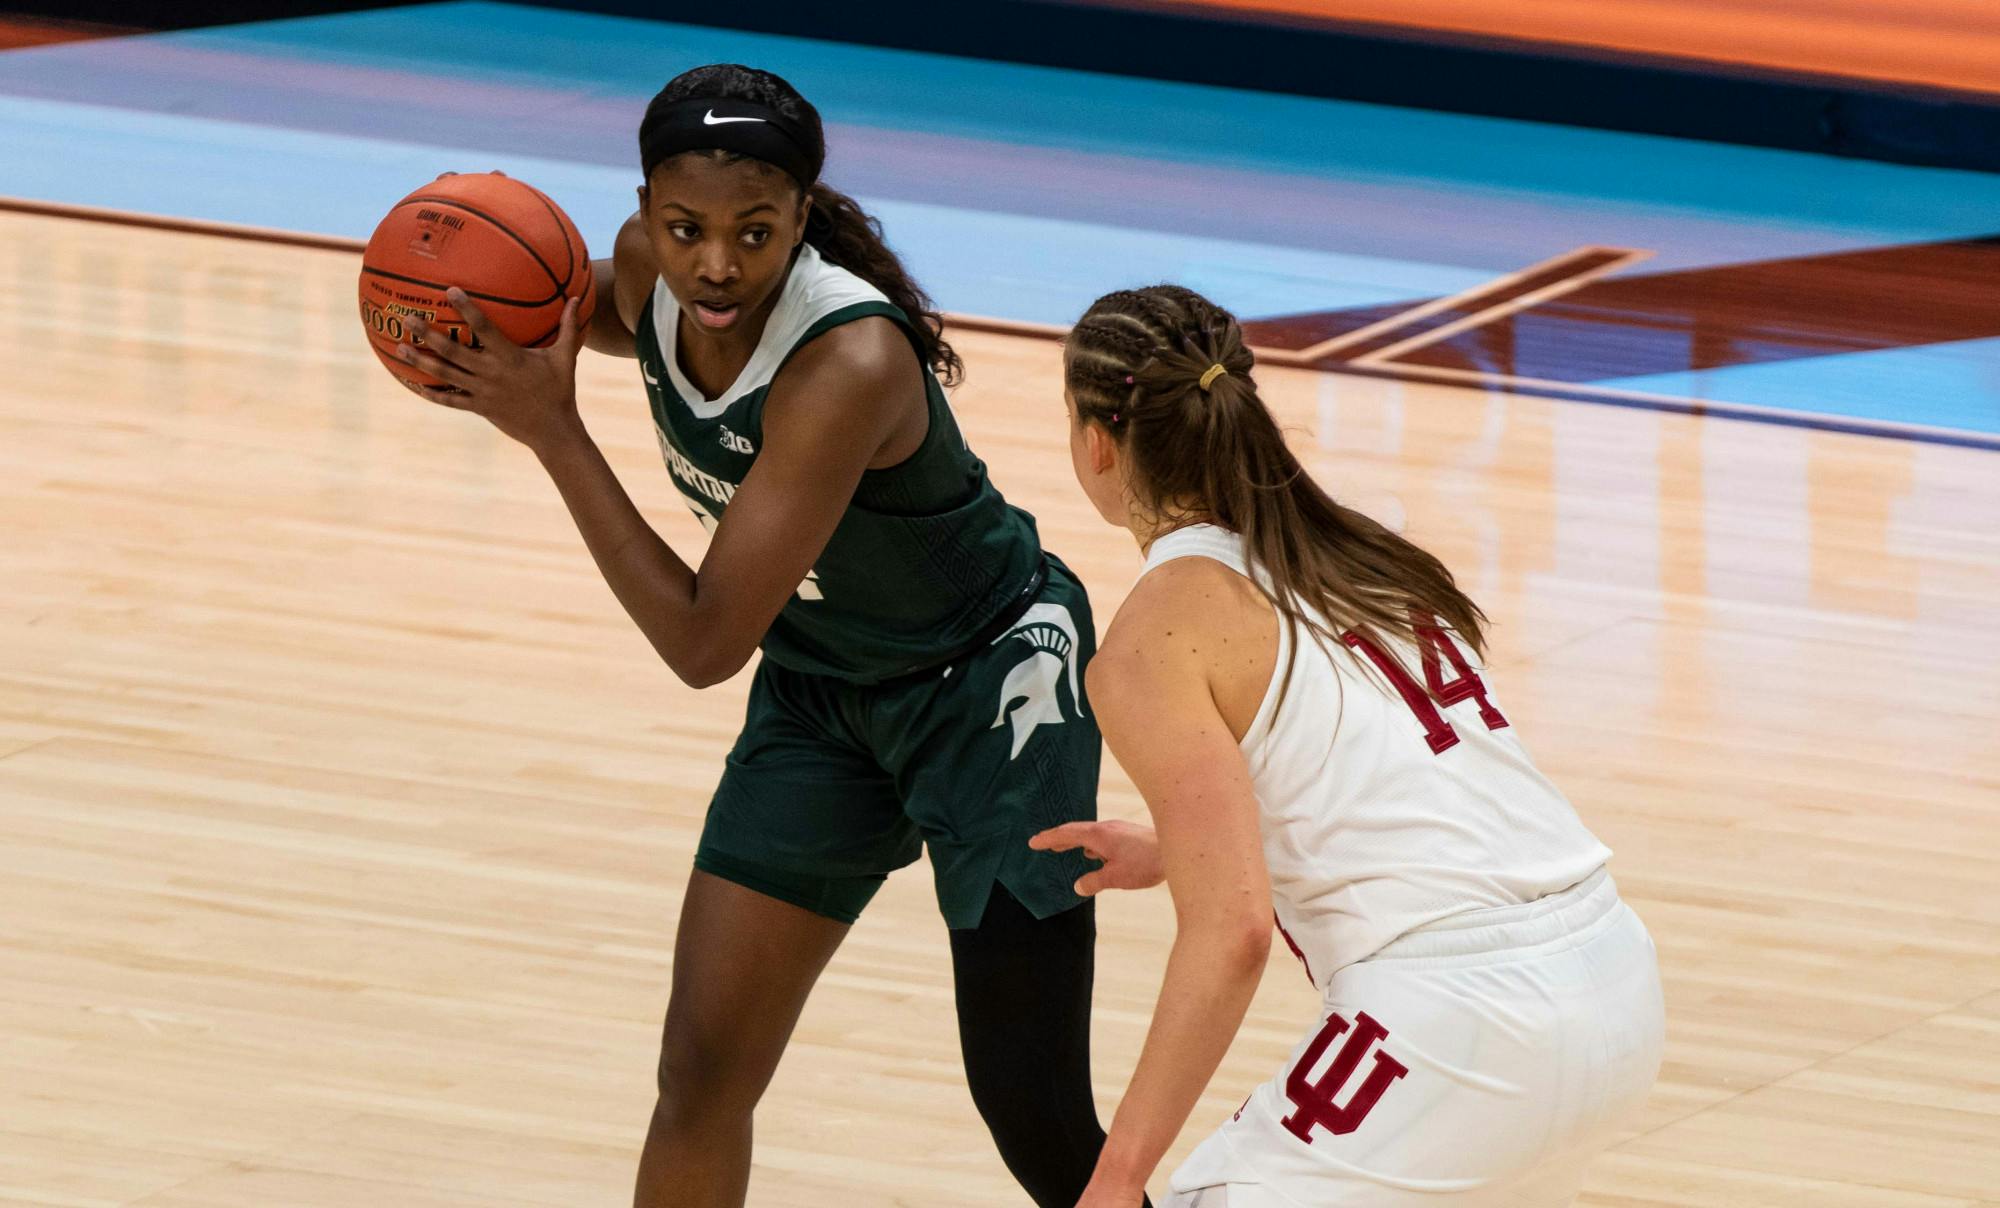 <p>Then-junior guard Nia Clouden (24) stares down an Indiana player during the first quarter of the game. The Spartans advanced to the semifinals of the Big Ten Tournament after defeating the Hoosiers, 69-61, at Bankers Life Fieldhouse. Shot on March 11, 2021.</p>